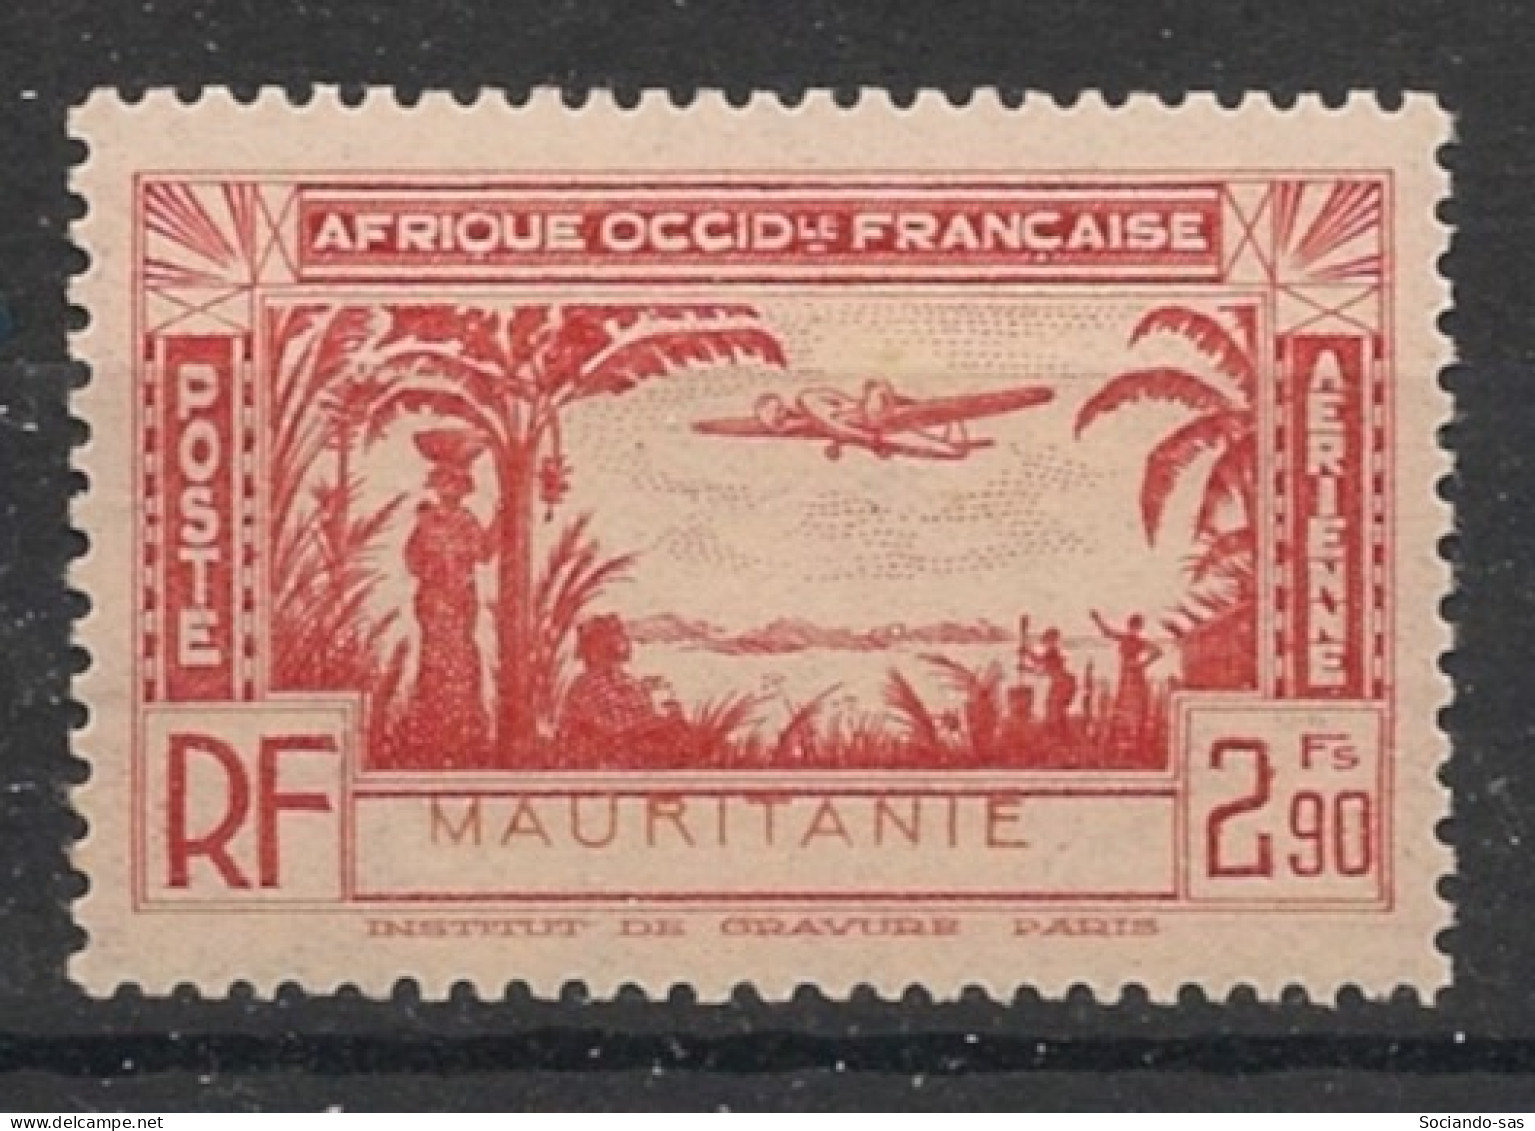 MAURITANIE - 1940 - PA N°YT. 2 - Avion 2f90 Rouge - VARIETE Légende Déplacée - Neuf Luxe ** / MNH / Postfrisch - Unused Stamps